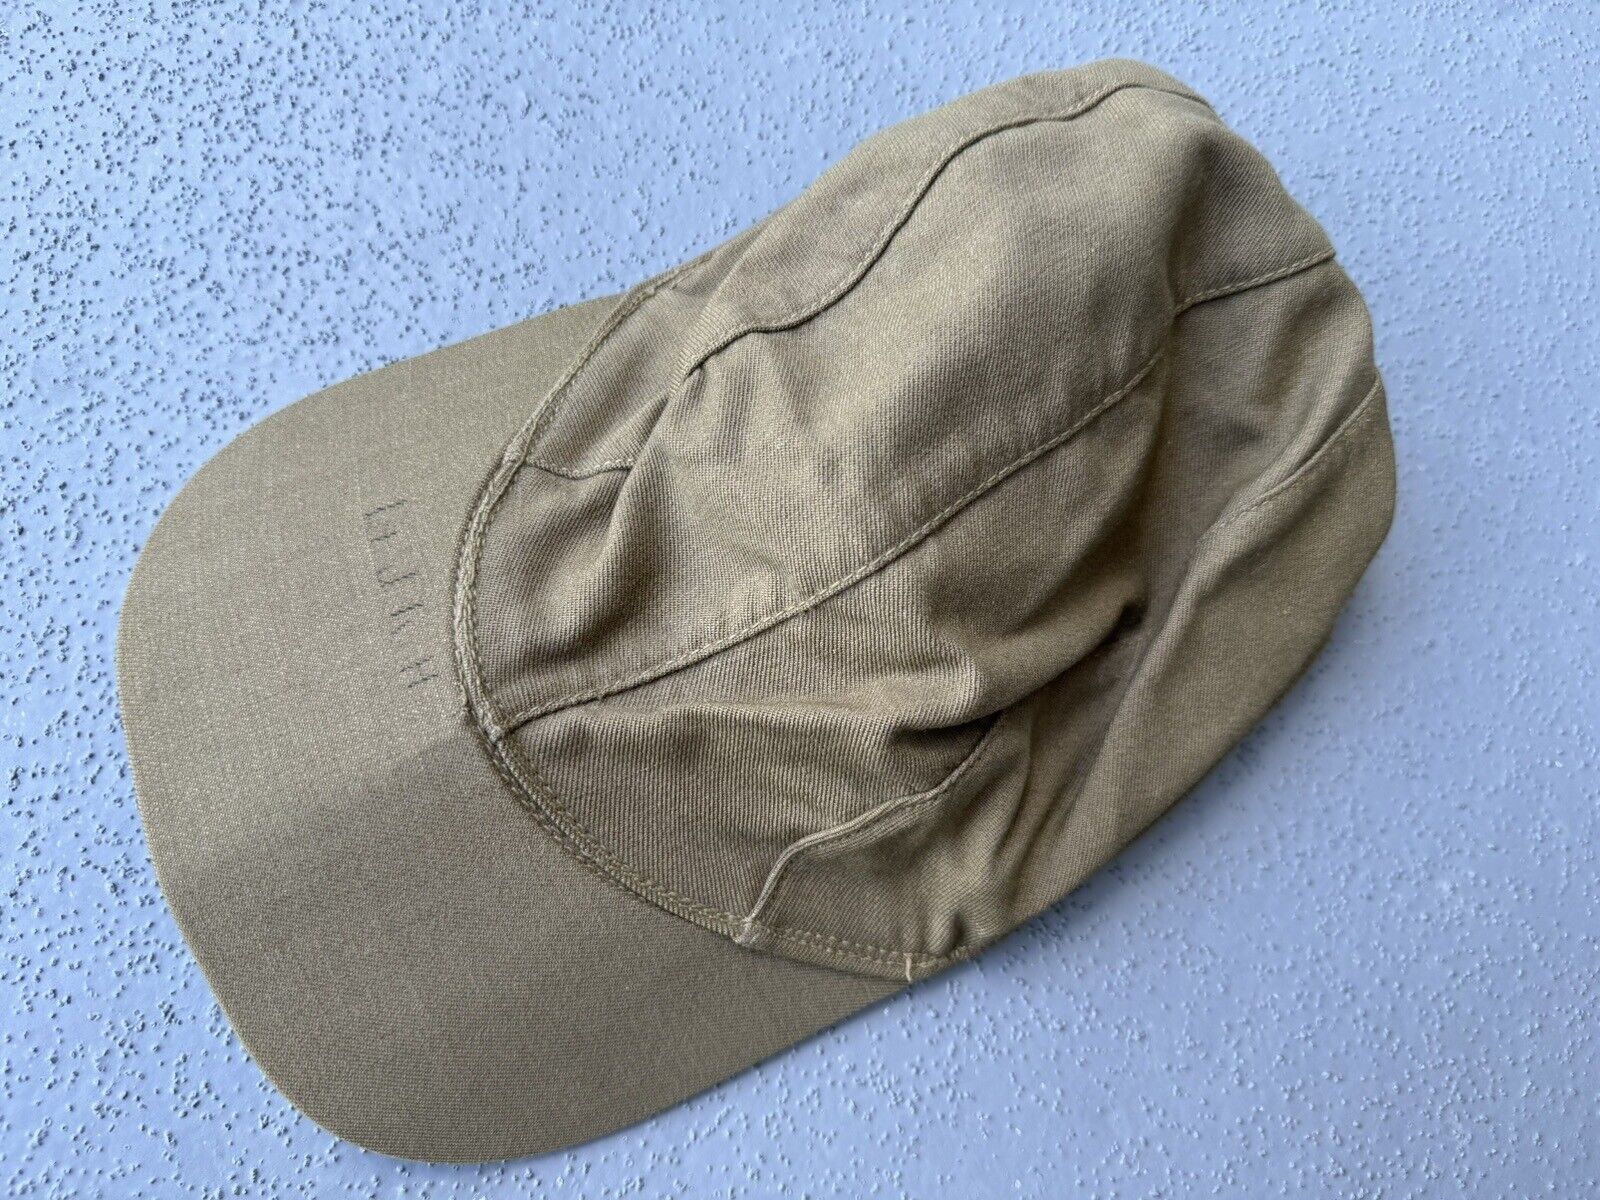 Original WWII Named Army Air Force Summer B-1 Flying Hat Cap 7 1/8